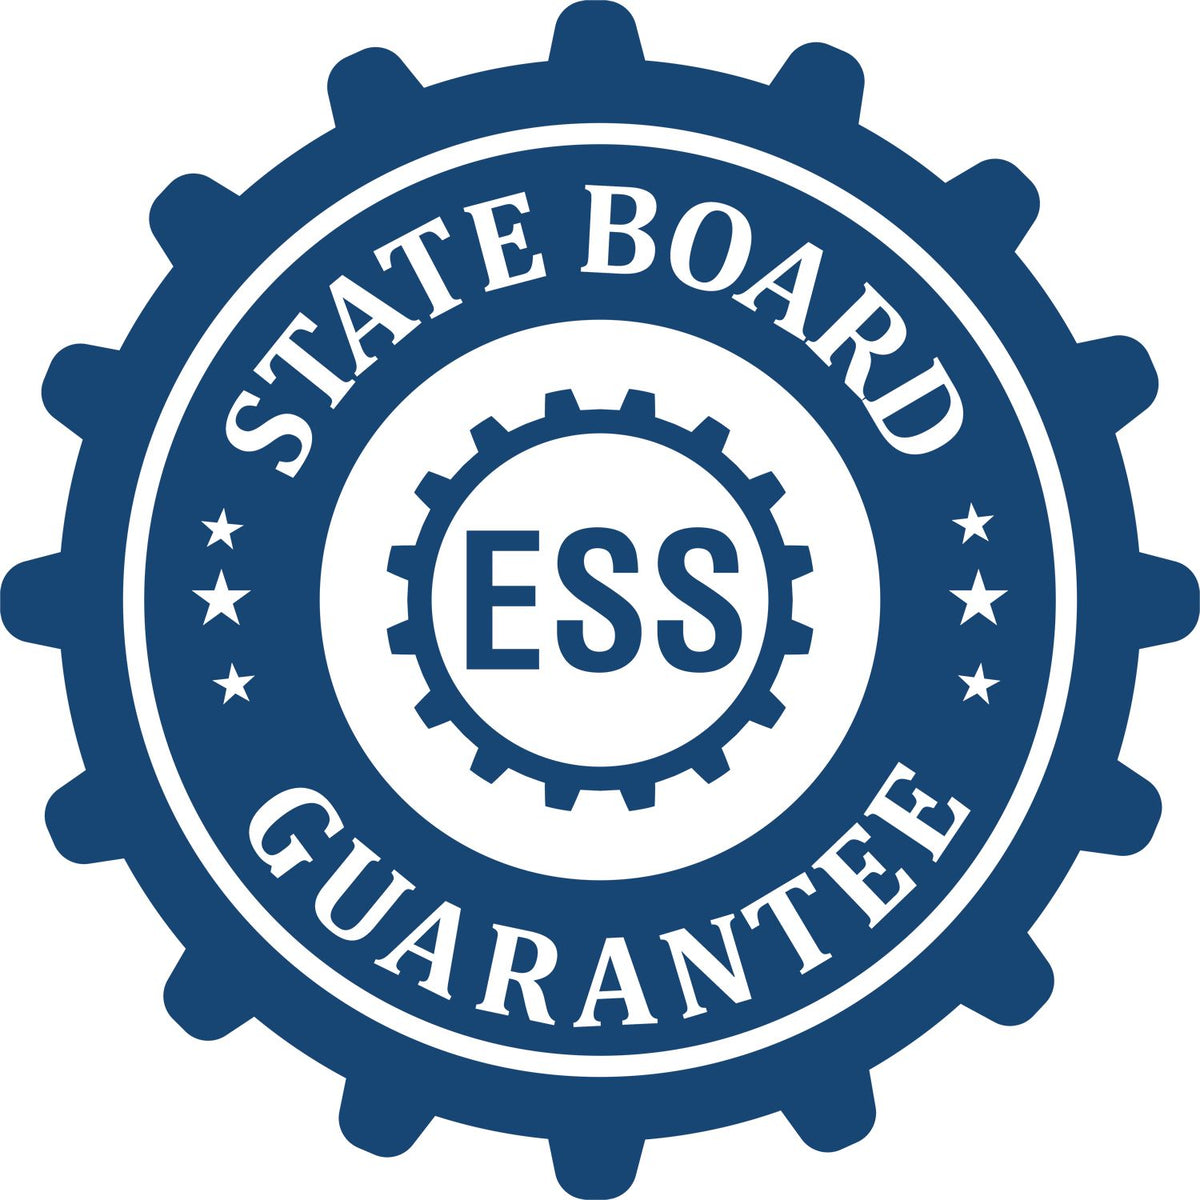 An emblem in a gear shape illustrating a state board guarantee for the Handheld Michigan Land Surveyor Seal product.